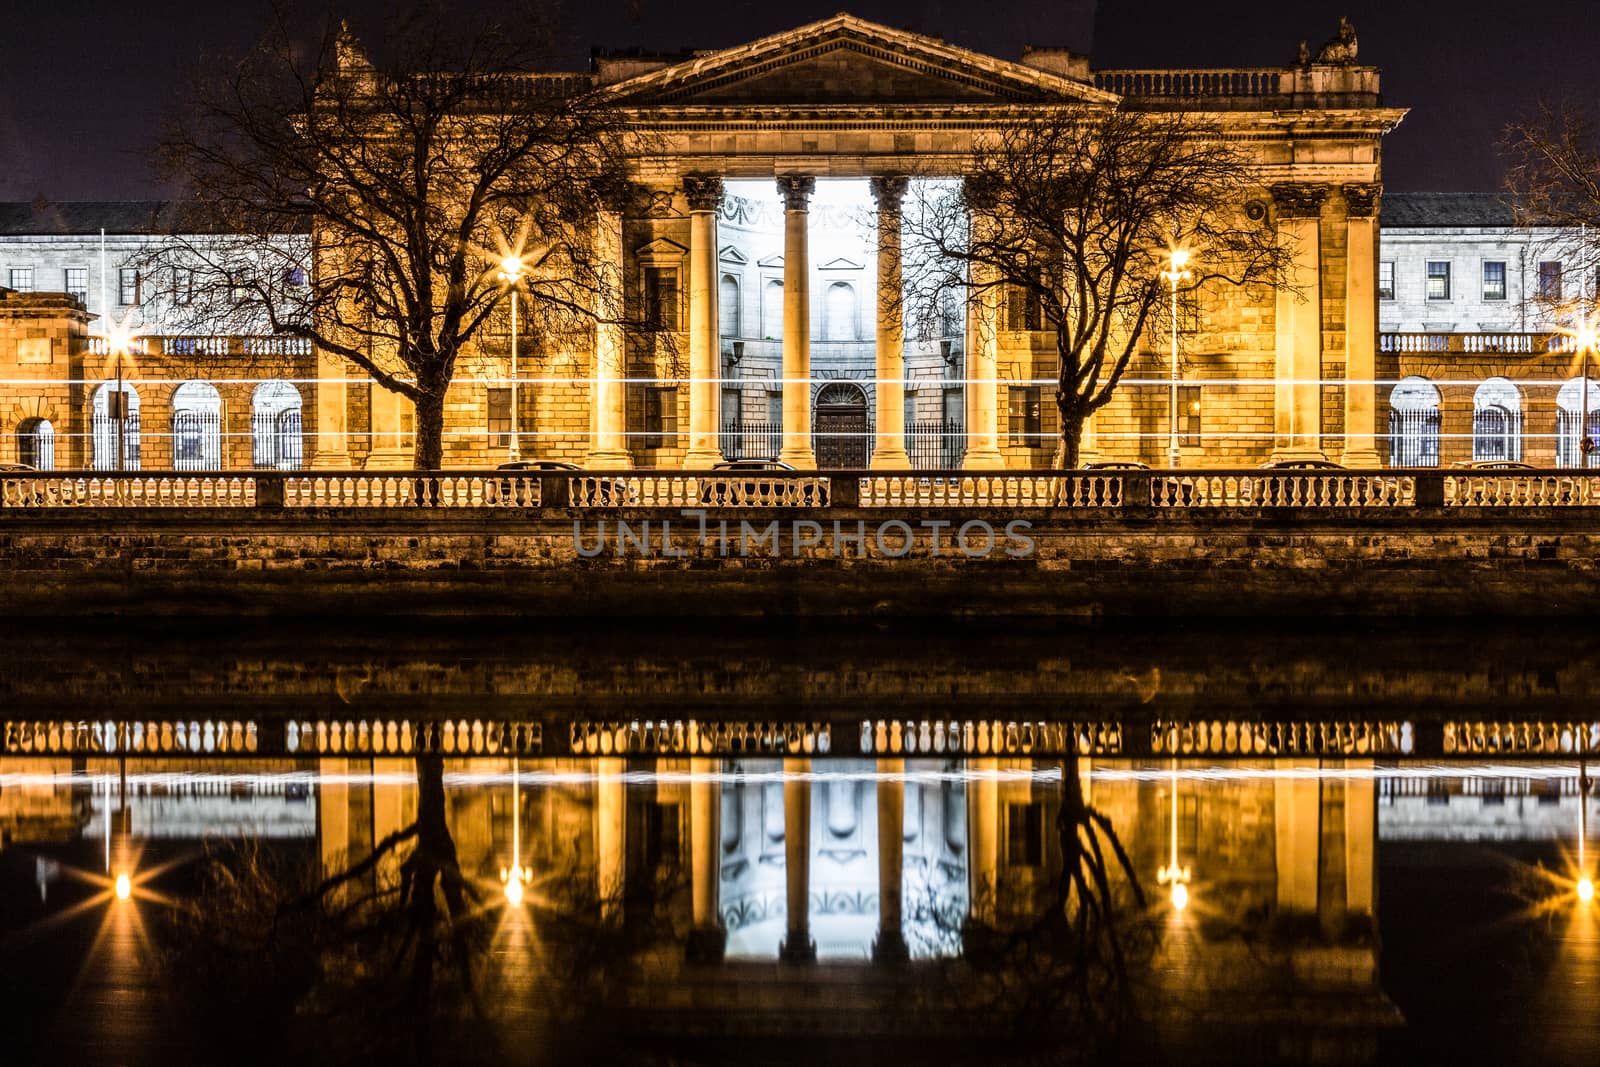 Night picture of the river liffey and Dublin Ireland Four Courts at the river liffey at night